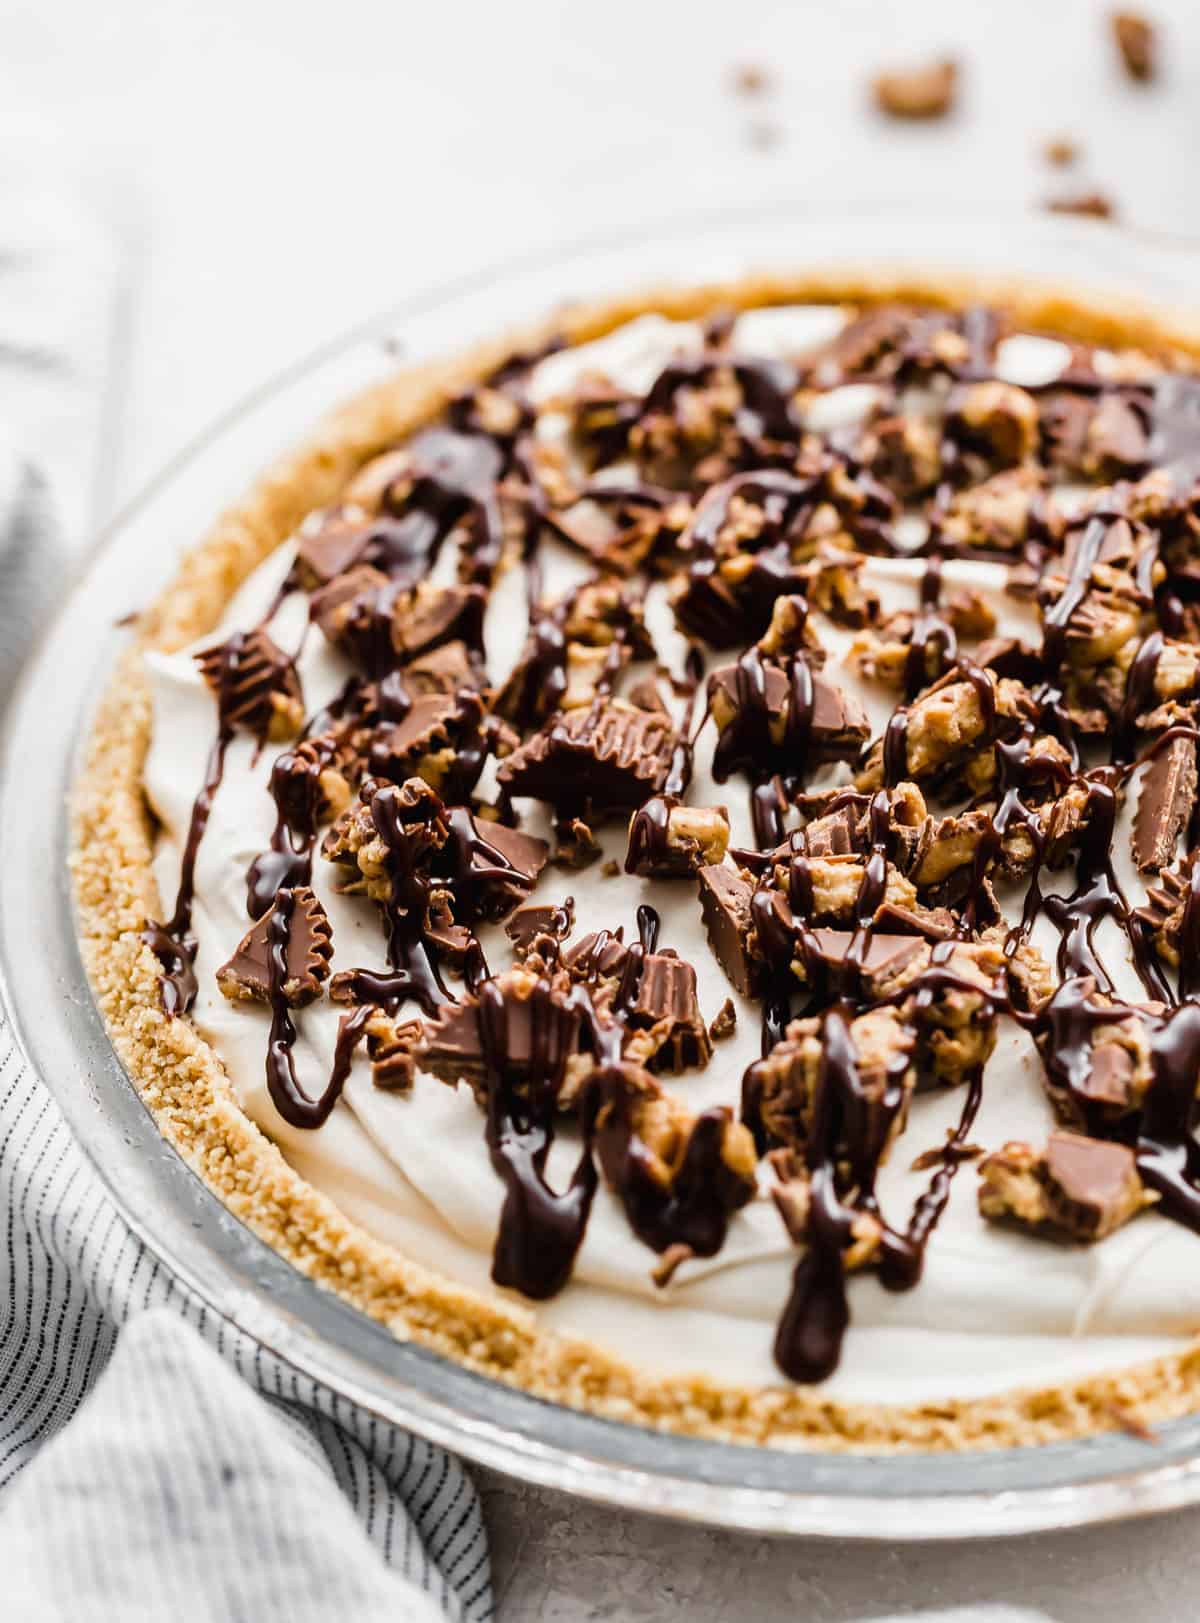 A Reese's peanut butter cup topped No-Bake Peanut Butter Pie.